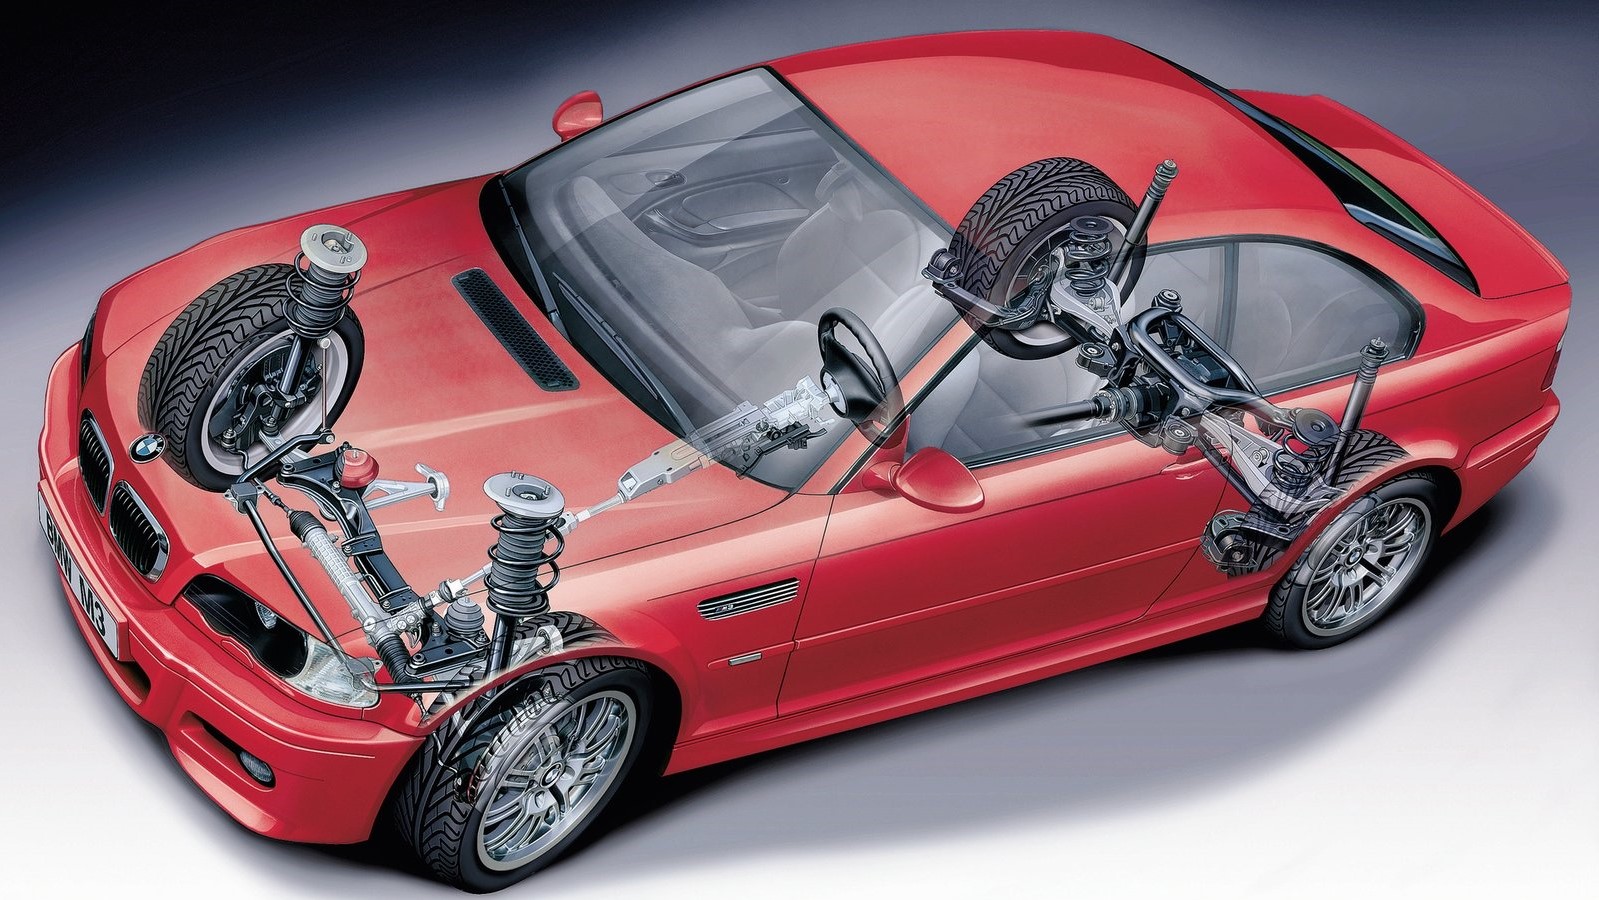 The Definitive Guide To The BMW E46 M3 Suspension & Brakes